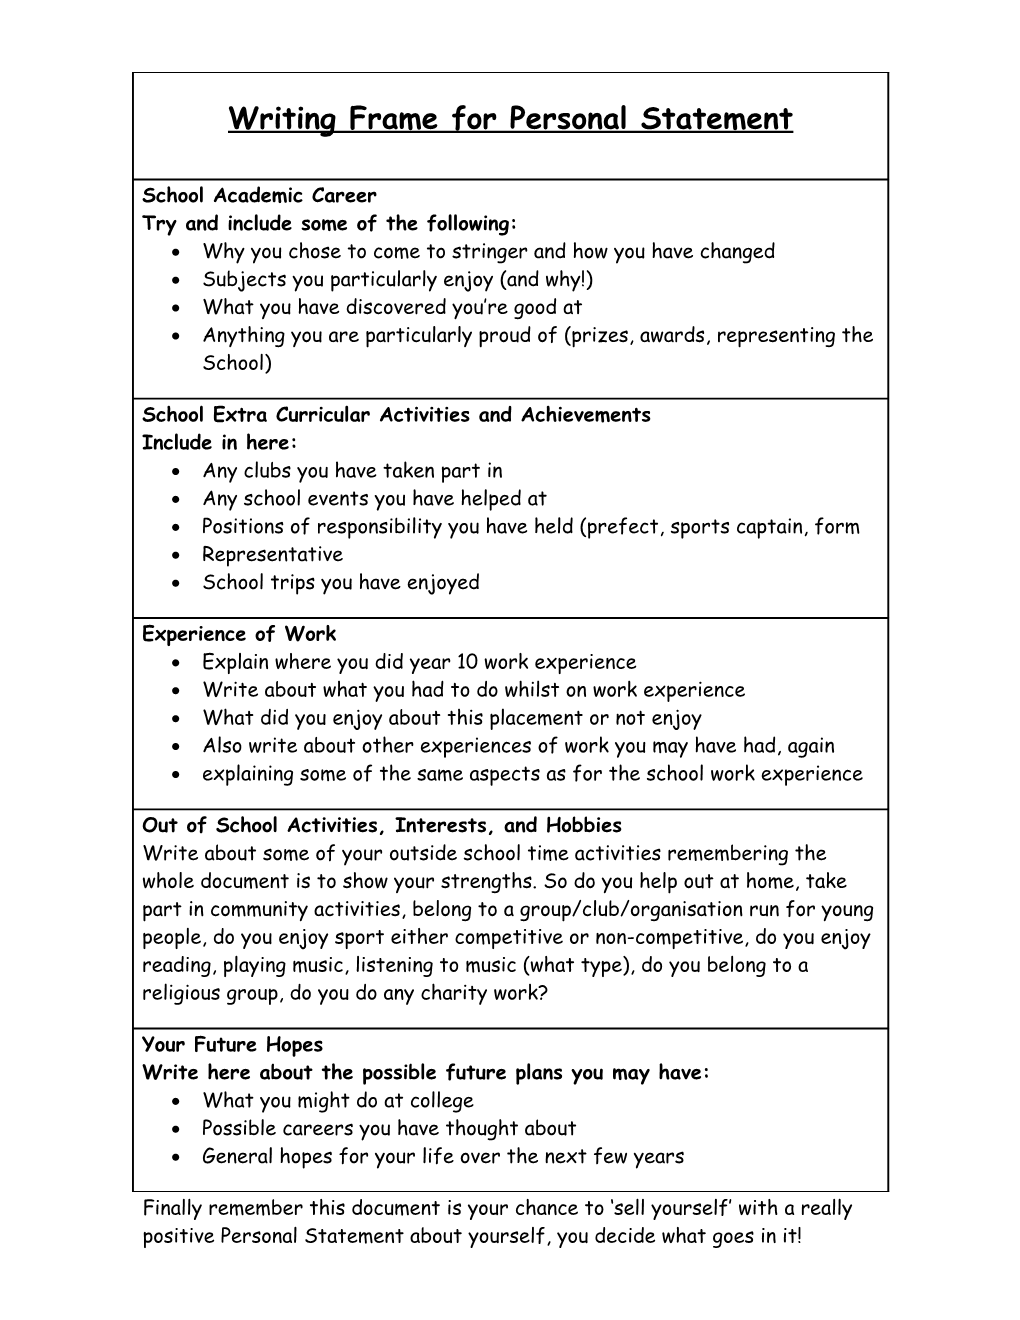 Writing Frame for Personal Statement